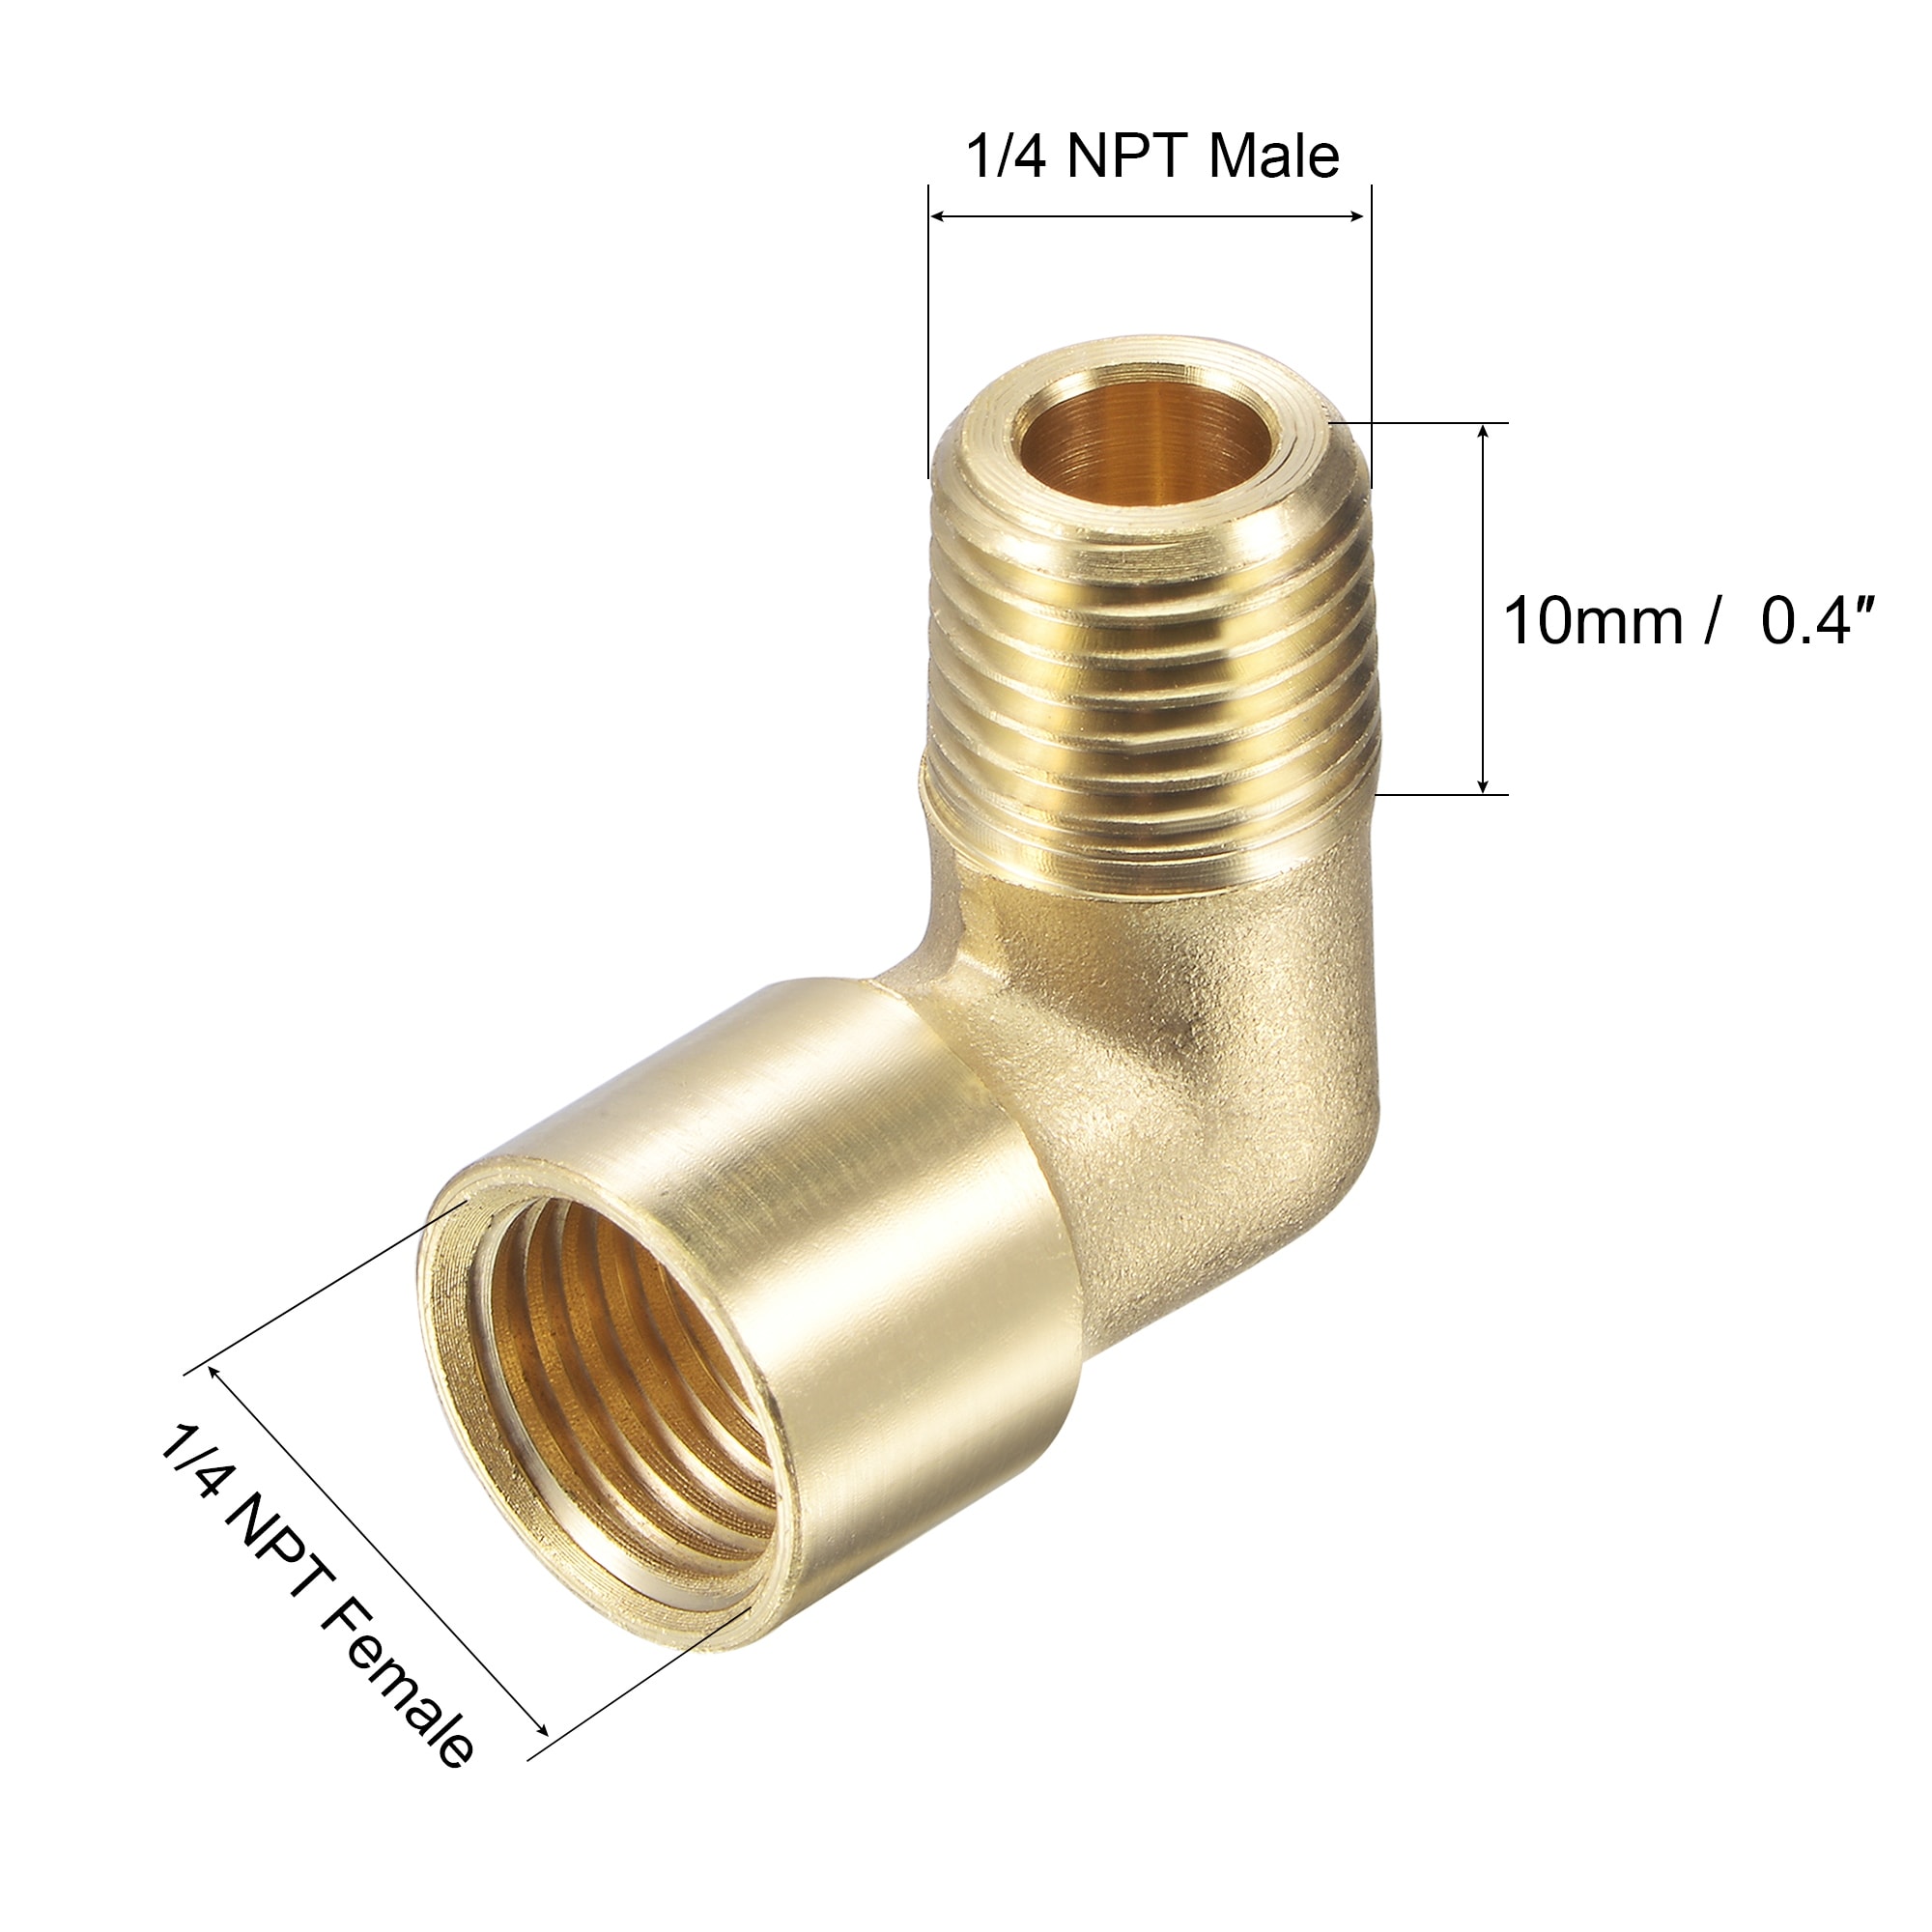 2pcs/set Brass Barb Fitting Male Elbow 90 Degree NPT 1/4" Hose Connector 